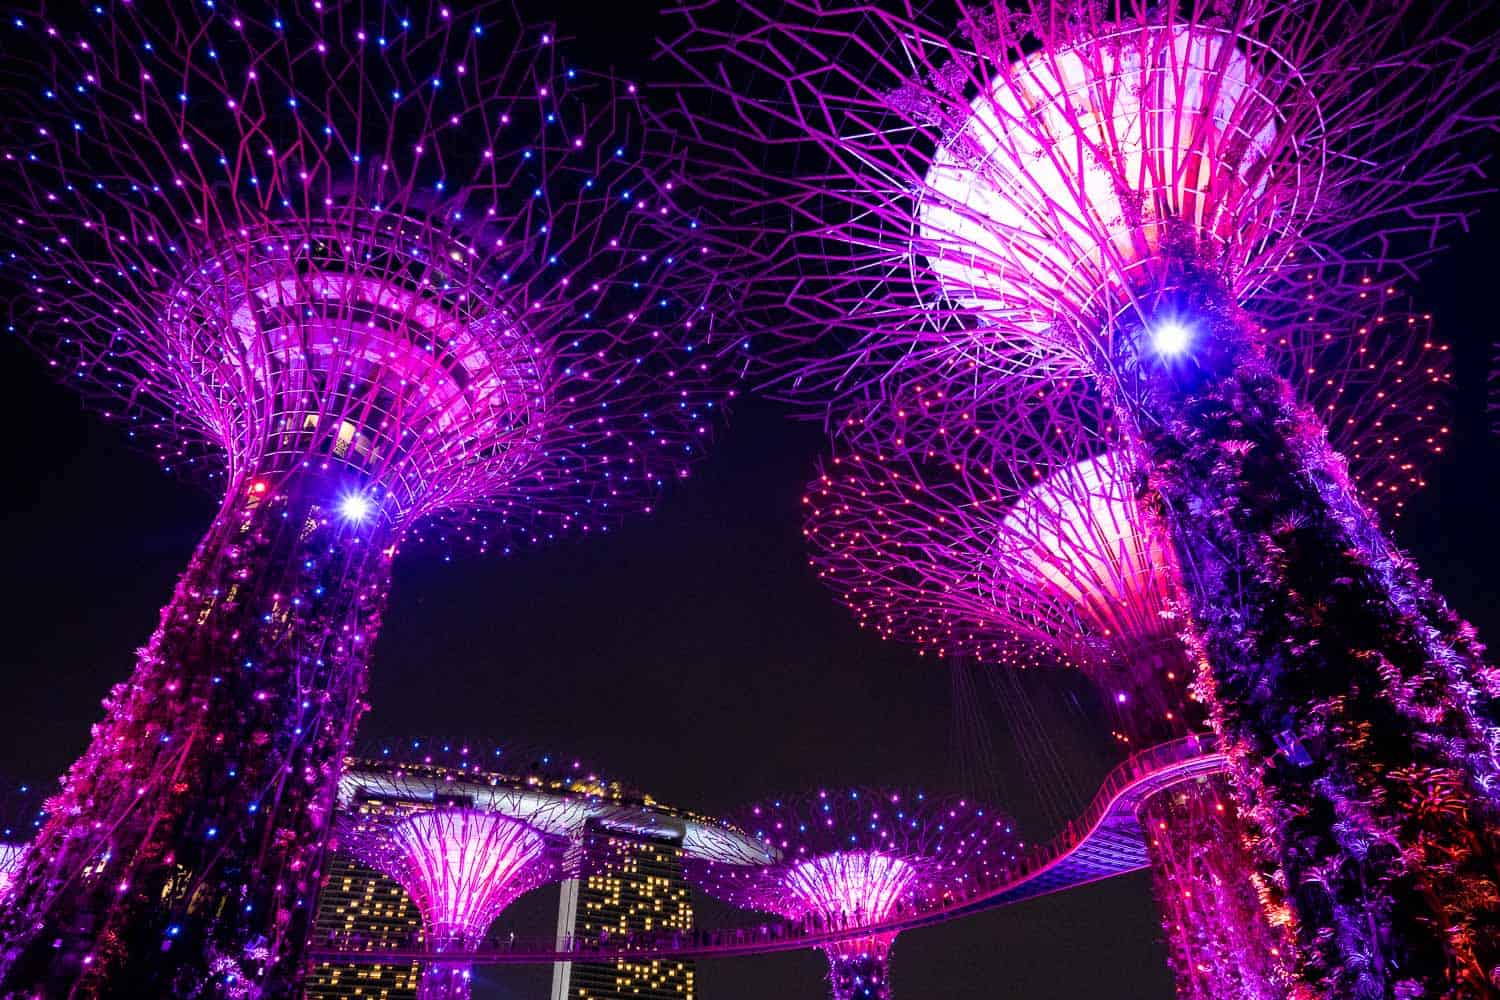 The Supertrees and OCBC Skyway during the light show with Marina Bay Sands in the background